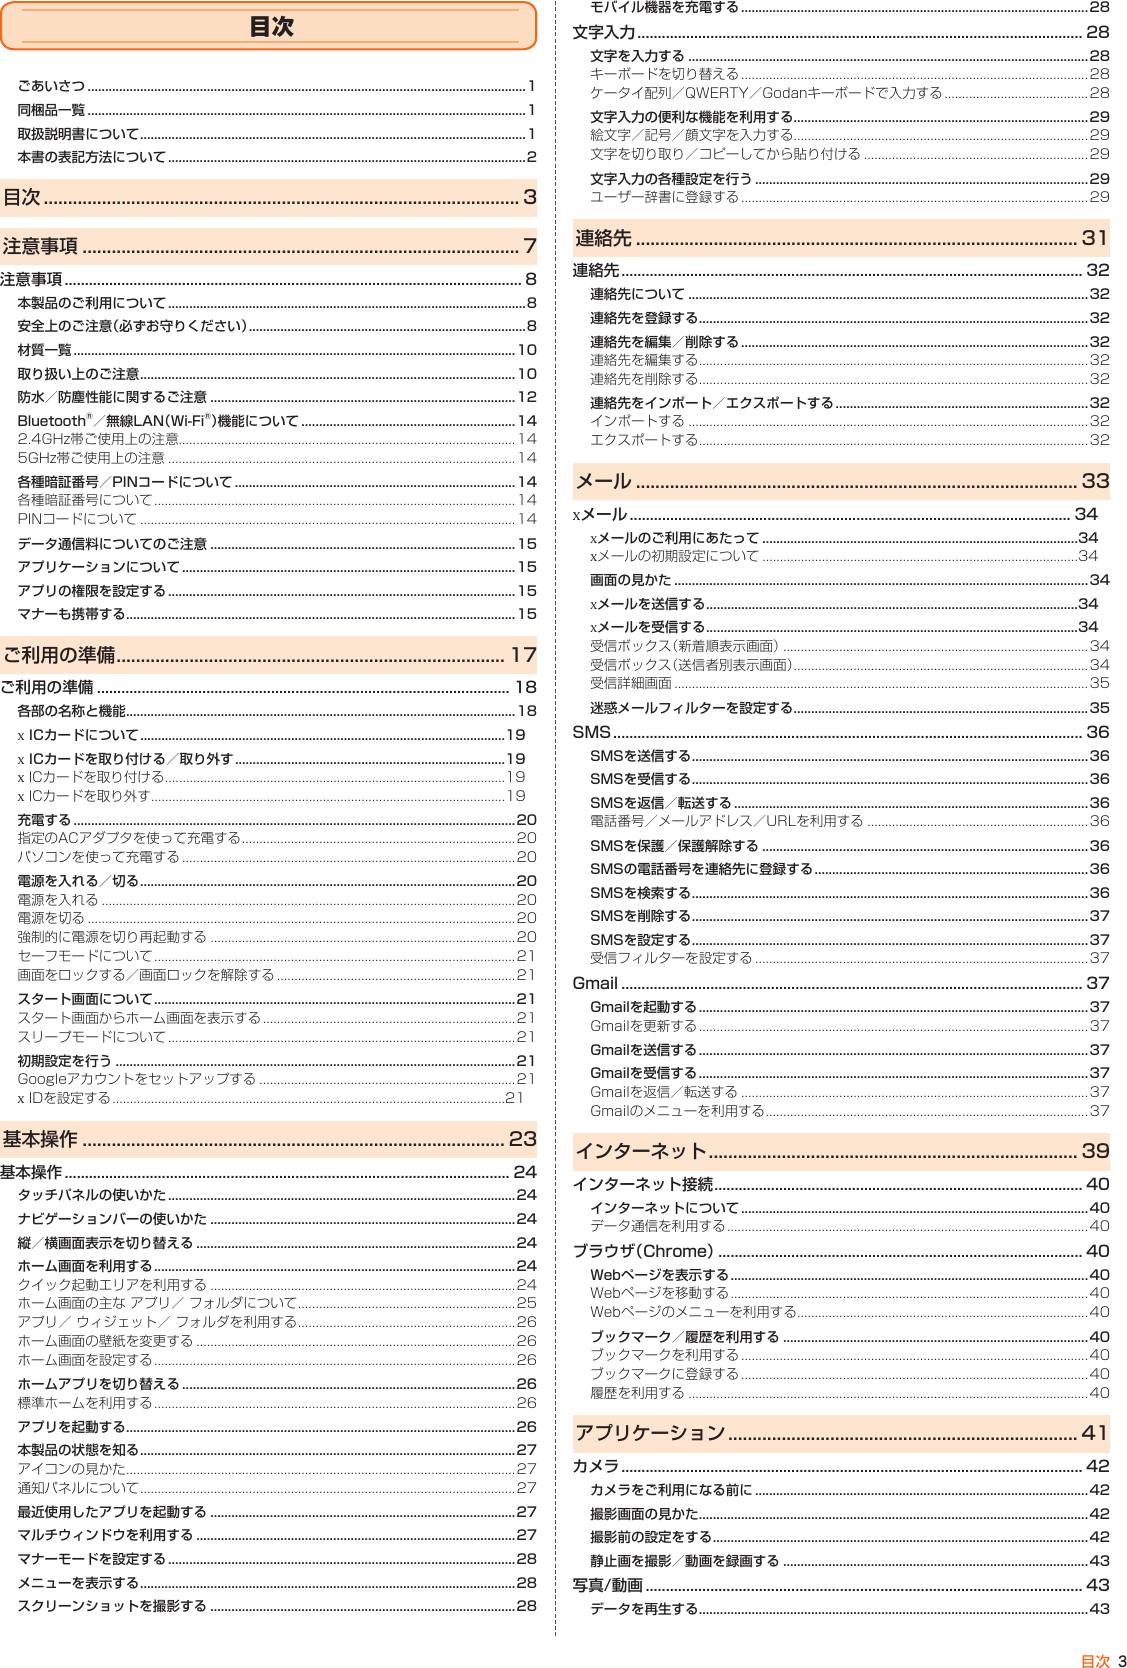 Page 4 of Kyocera FA51 Tablet User Manual part 2